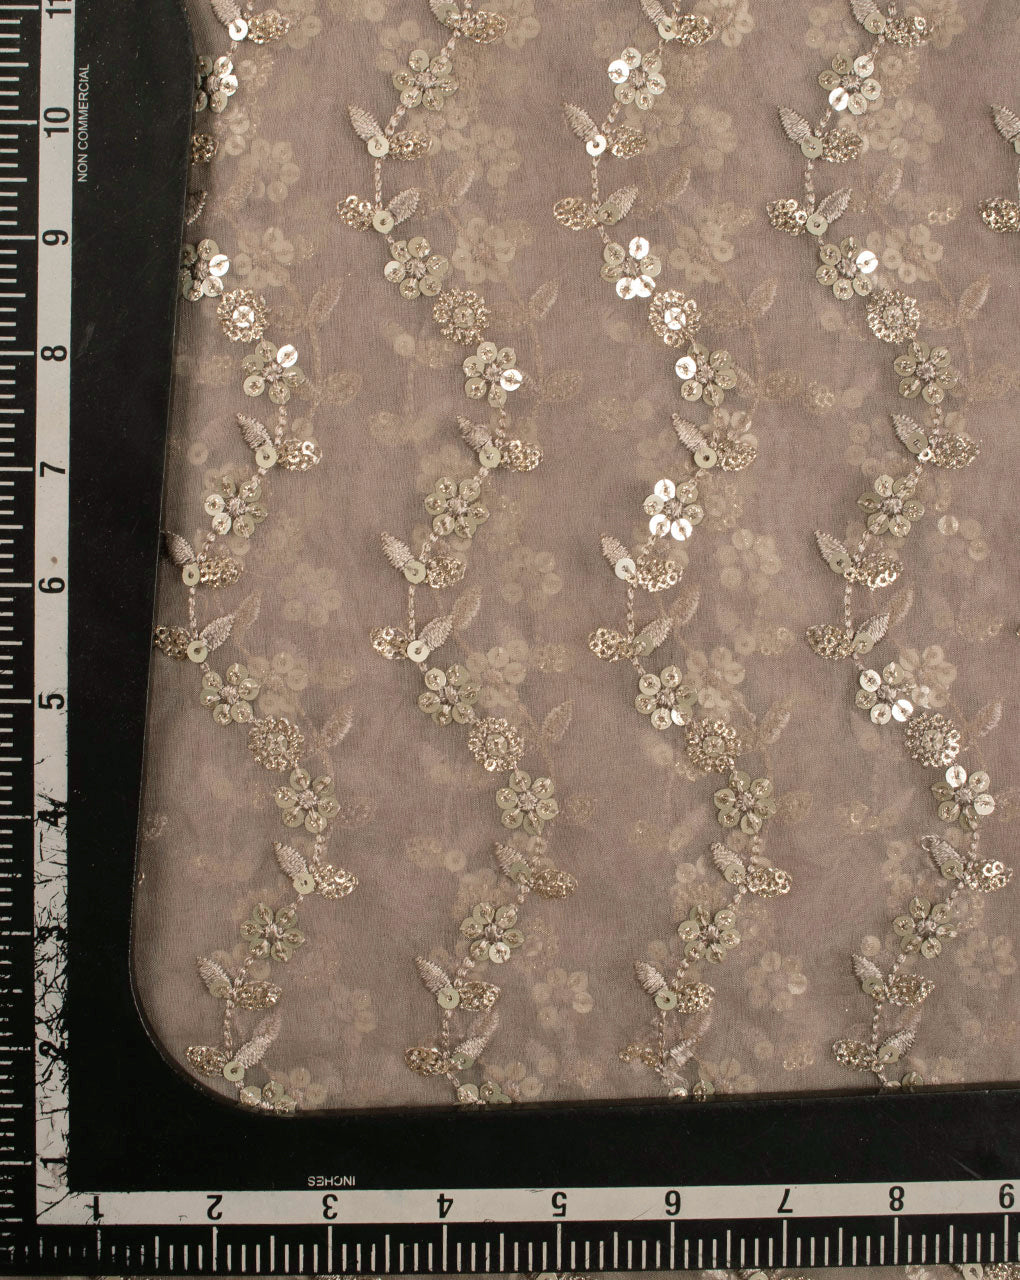 Embroidered Sequins Work Organza Fabric - Fabriclore.com